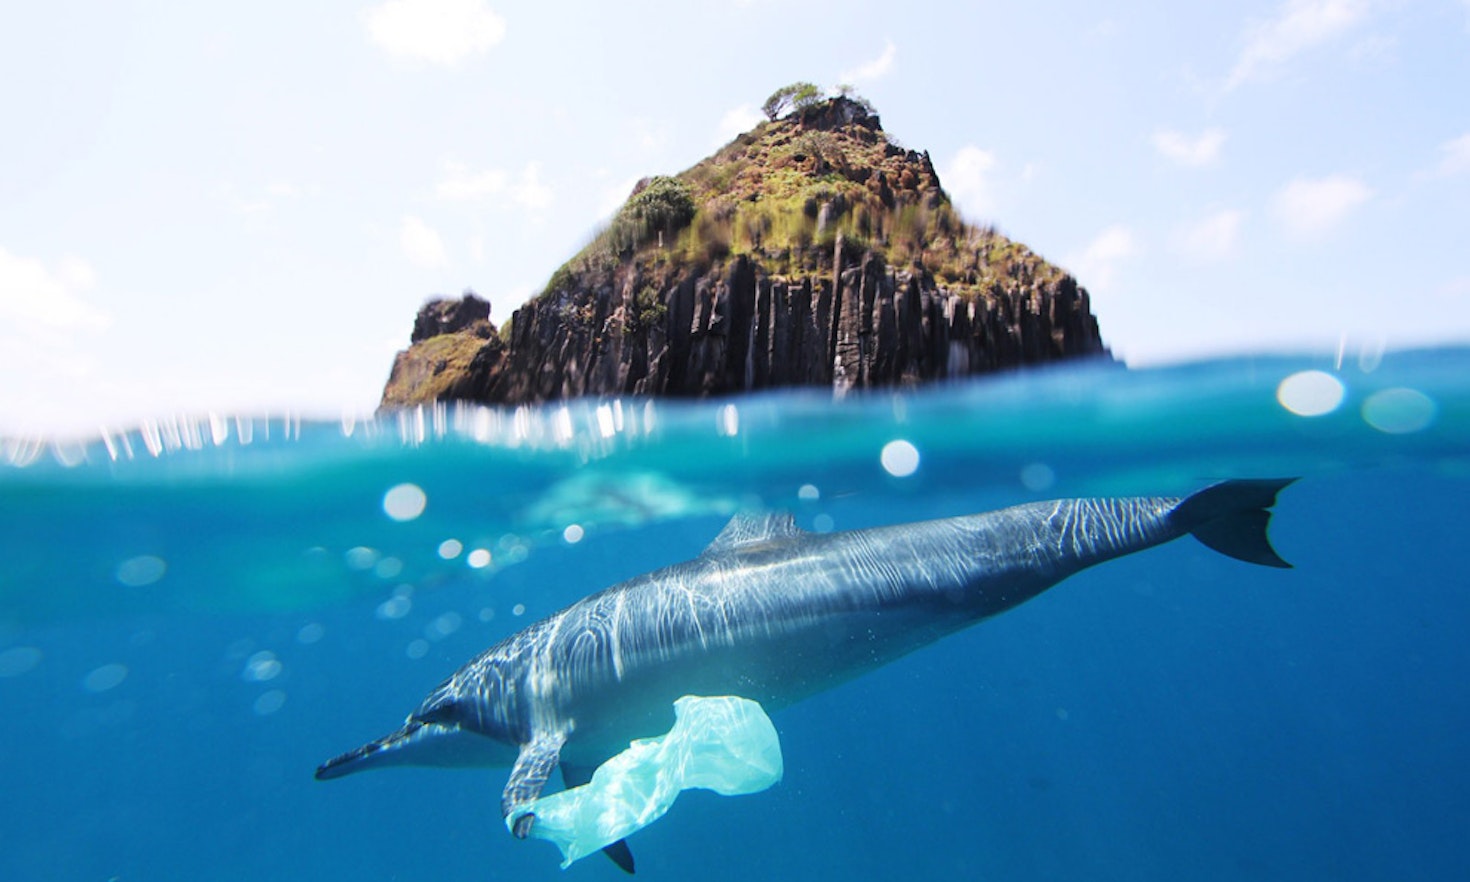 A European strategy to fight marine plastic pollution?